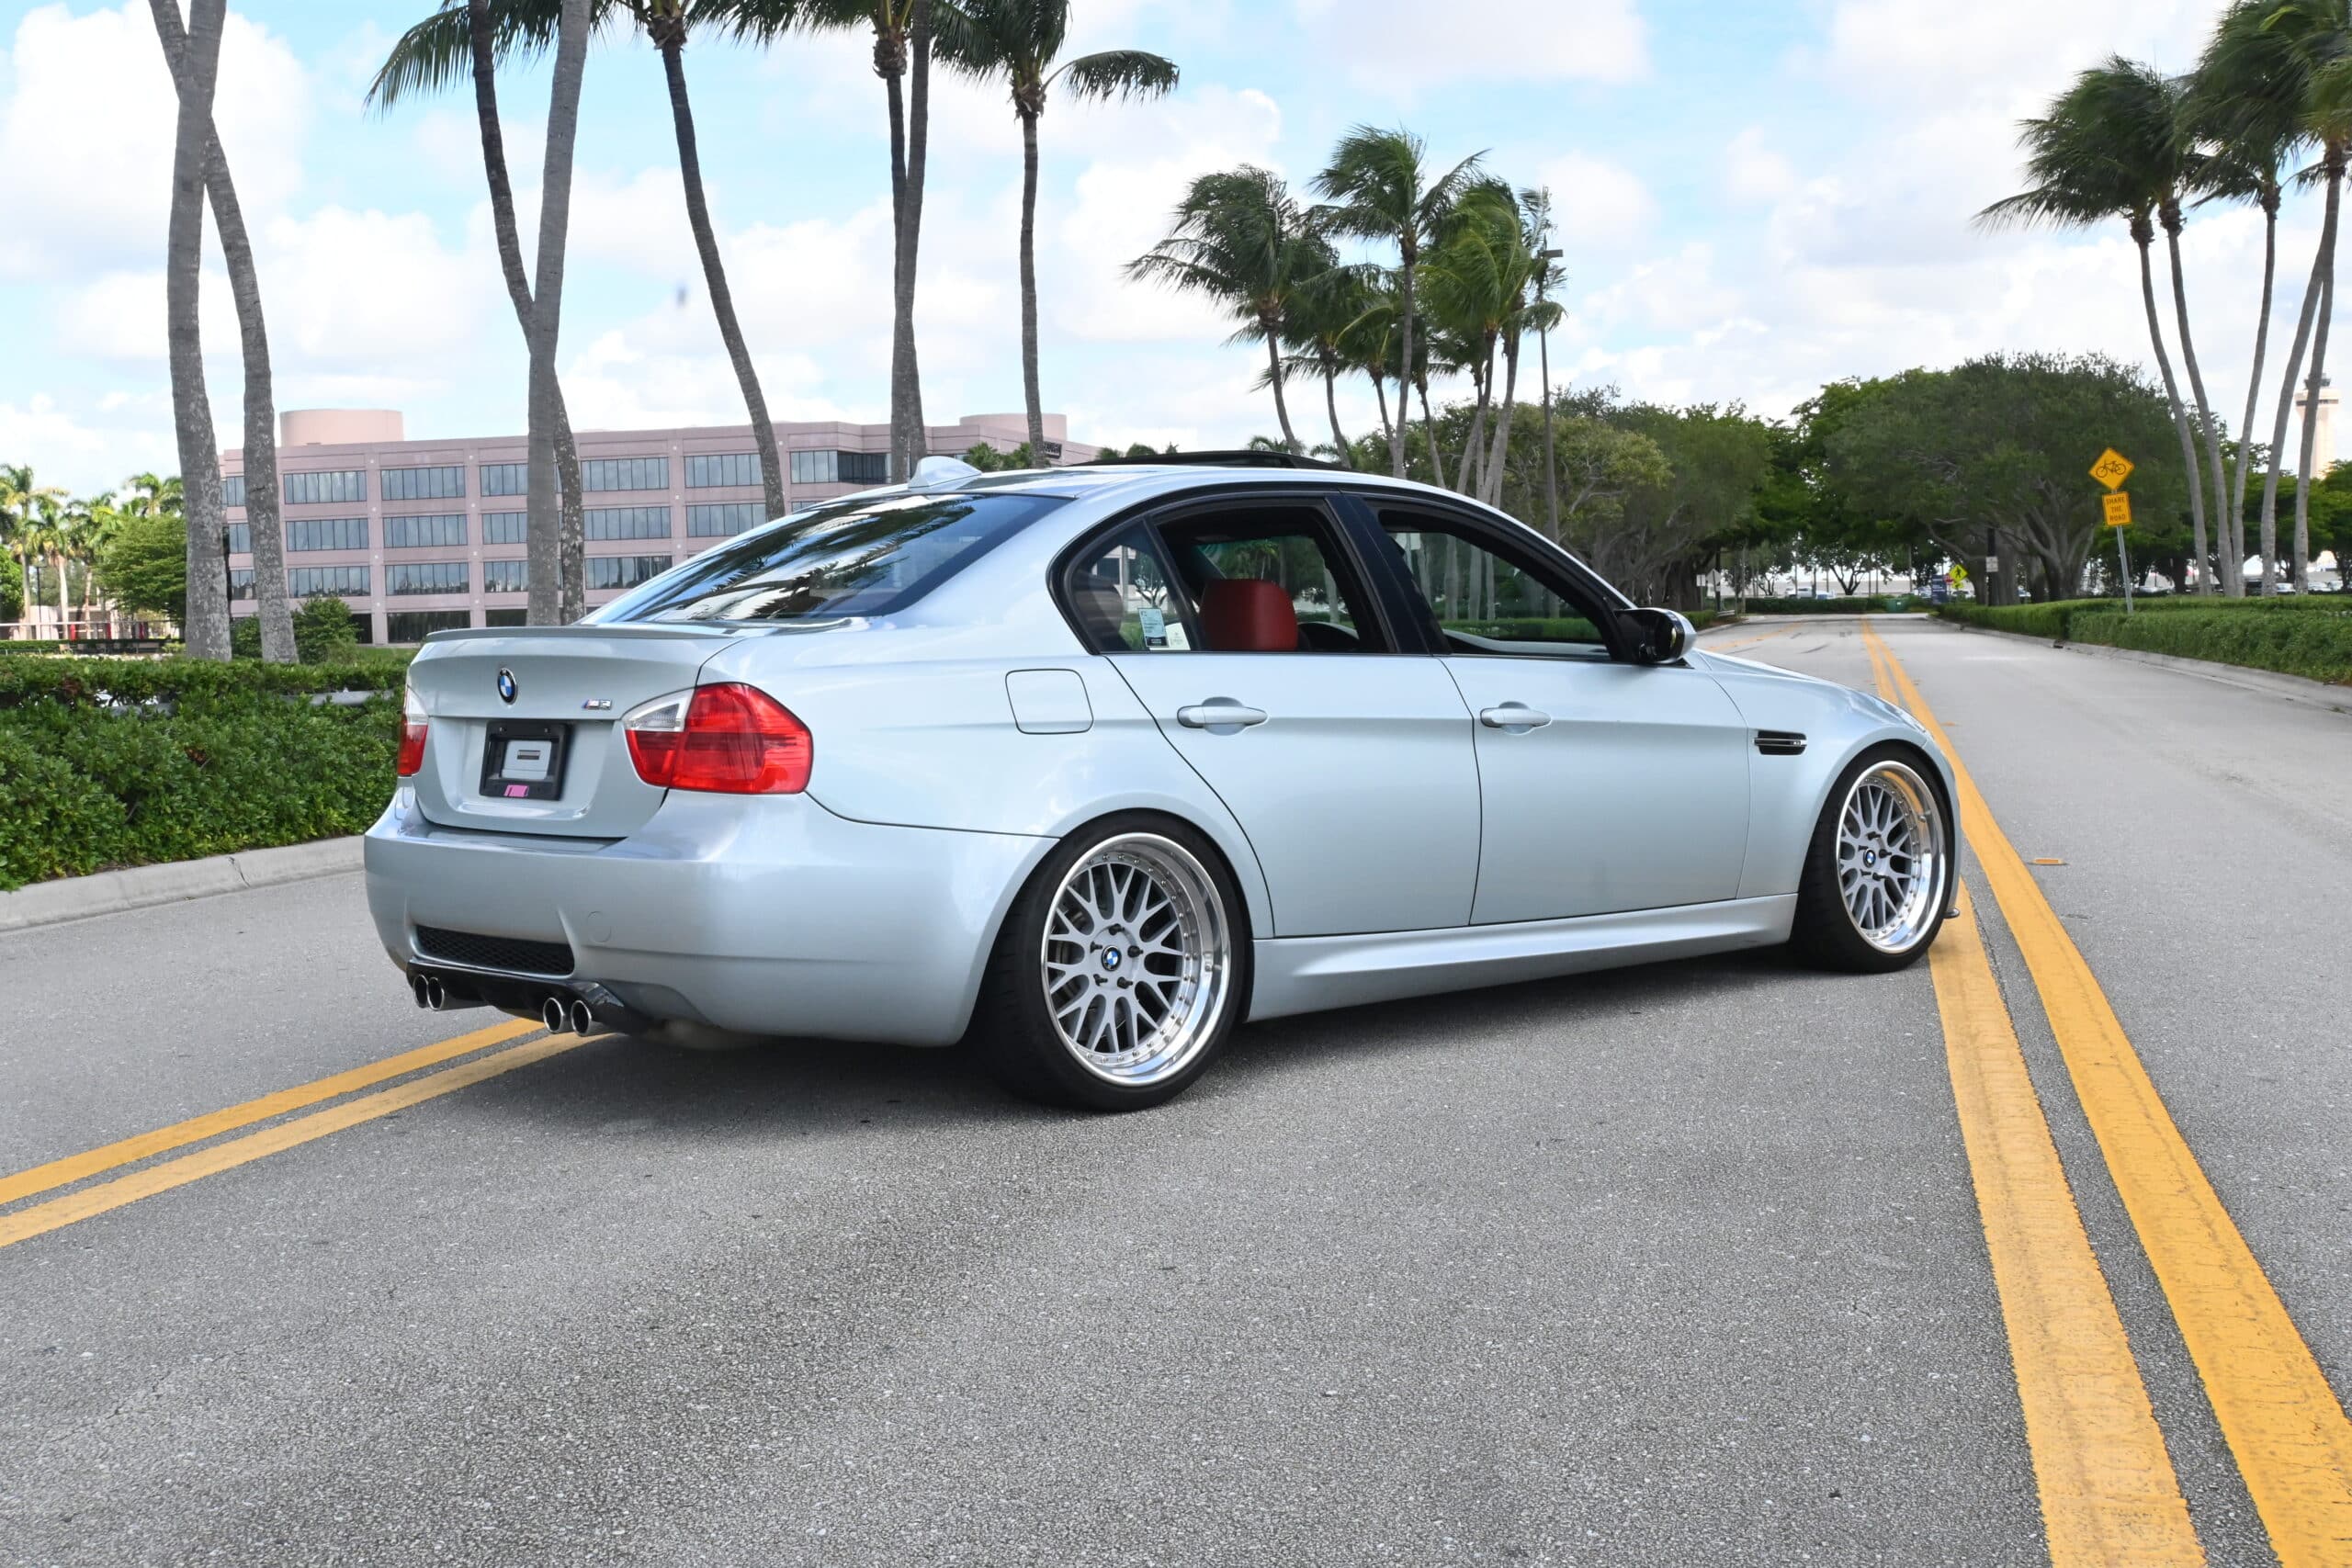 2008 BMW M3, 6-SPEED MANUAL, extensive options list, rod bearings, extended leather, turn key